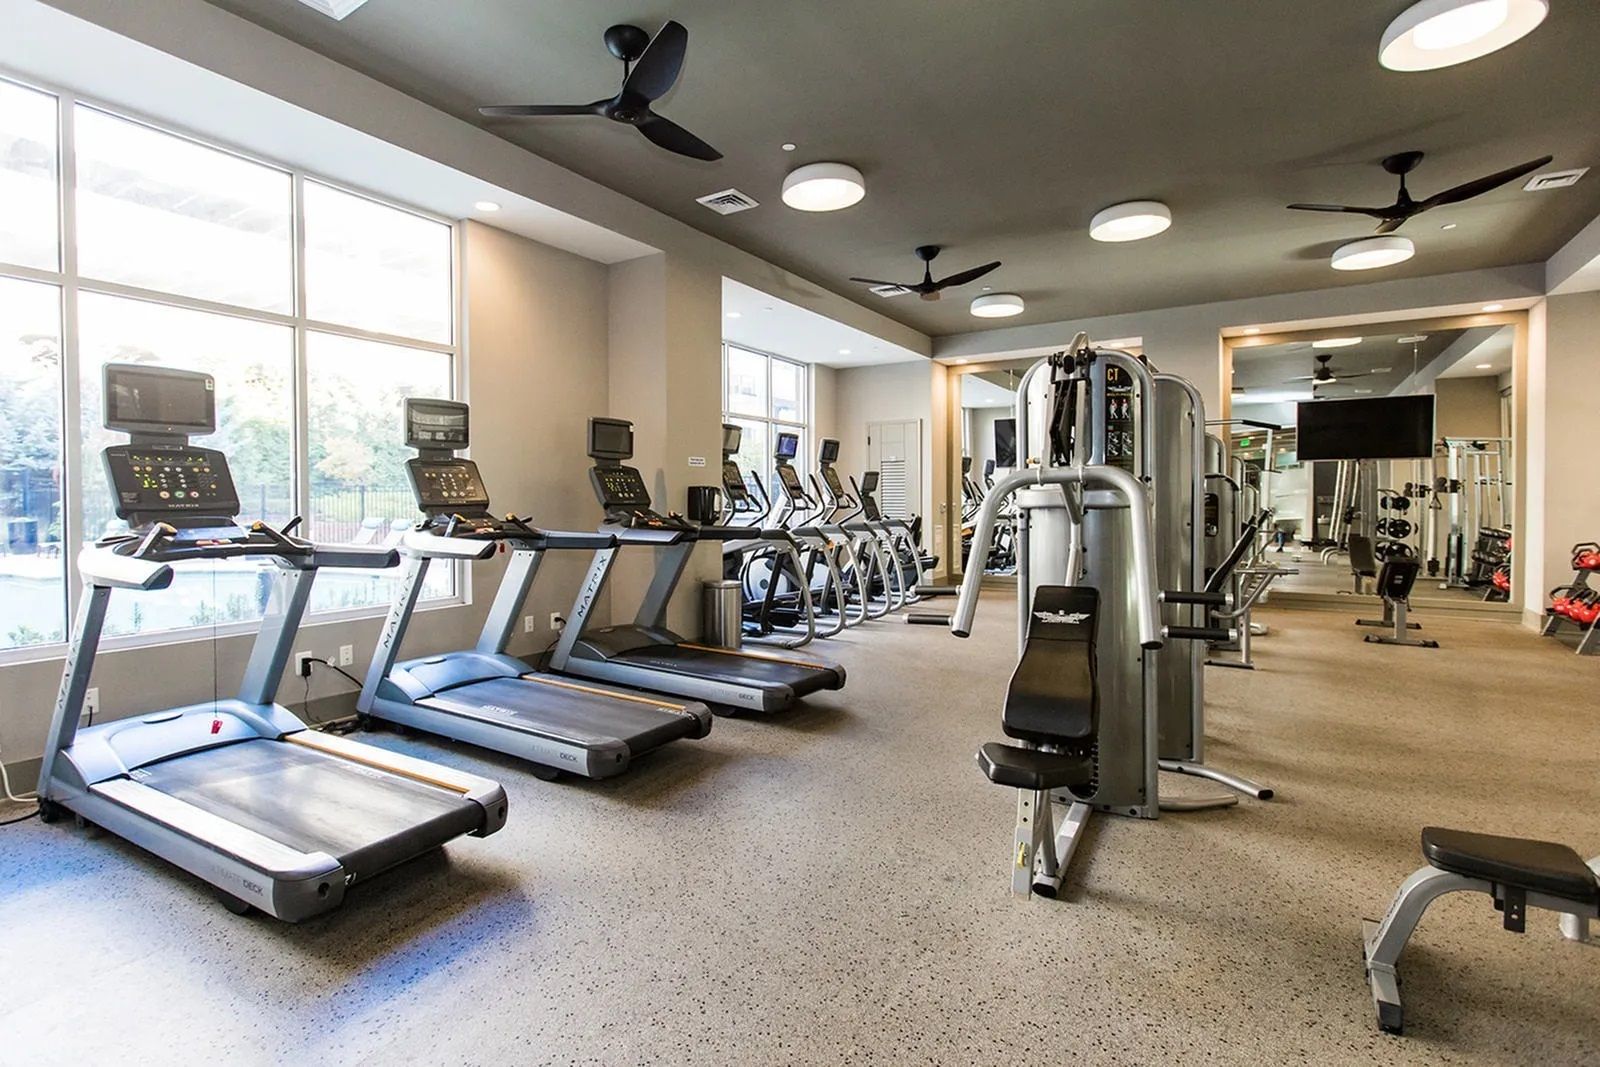 Fitness center at The Southerly.